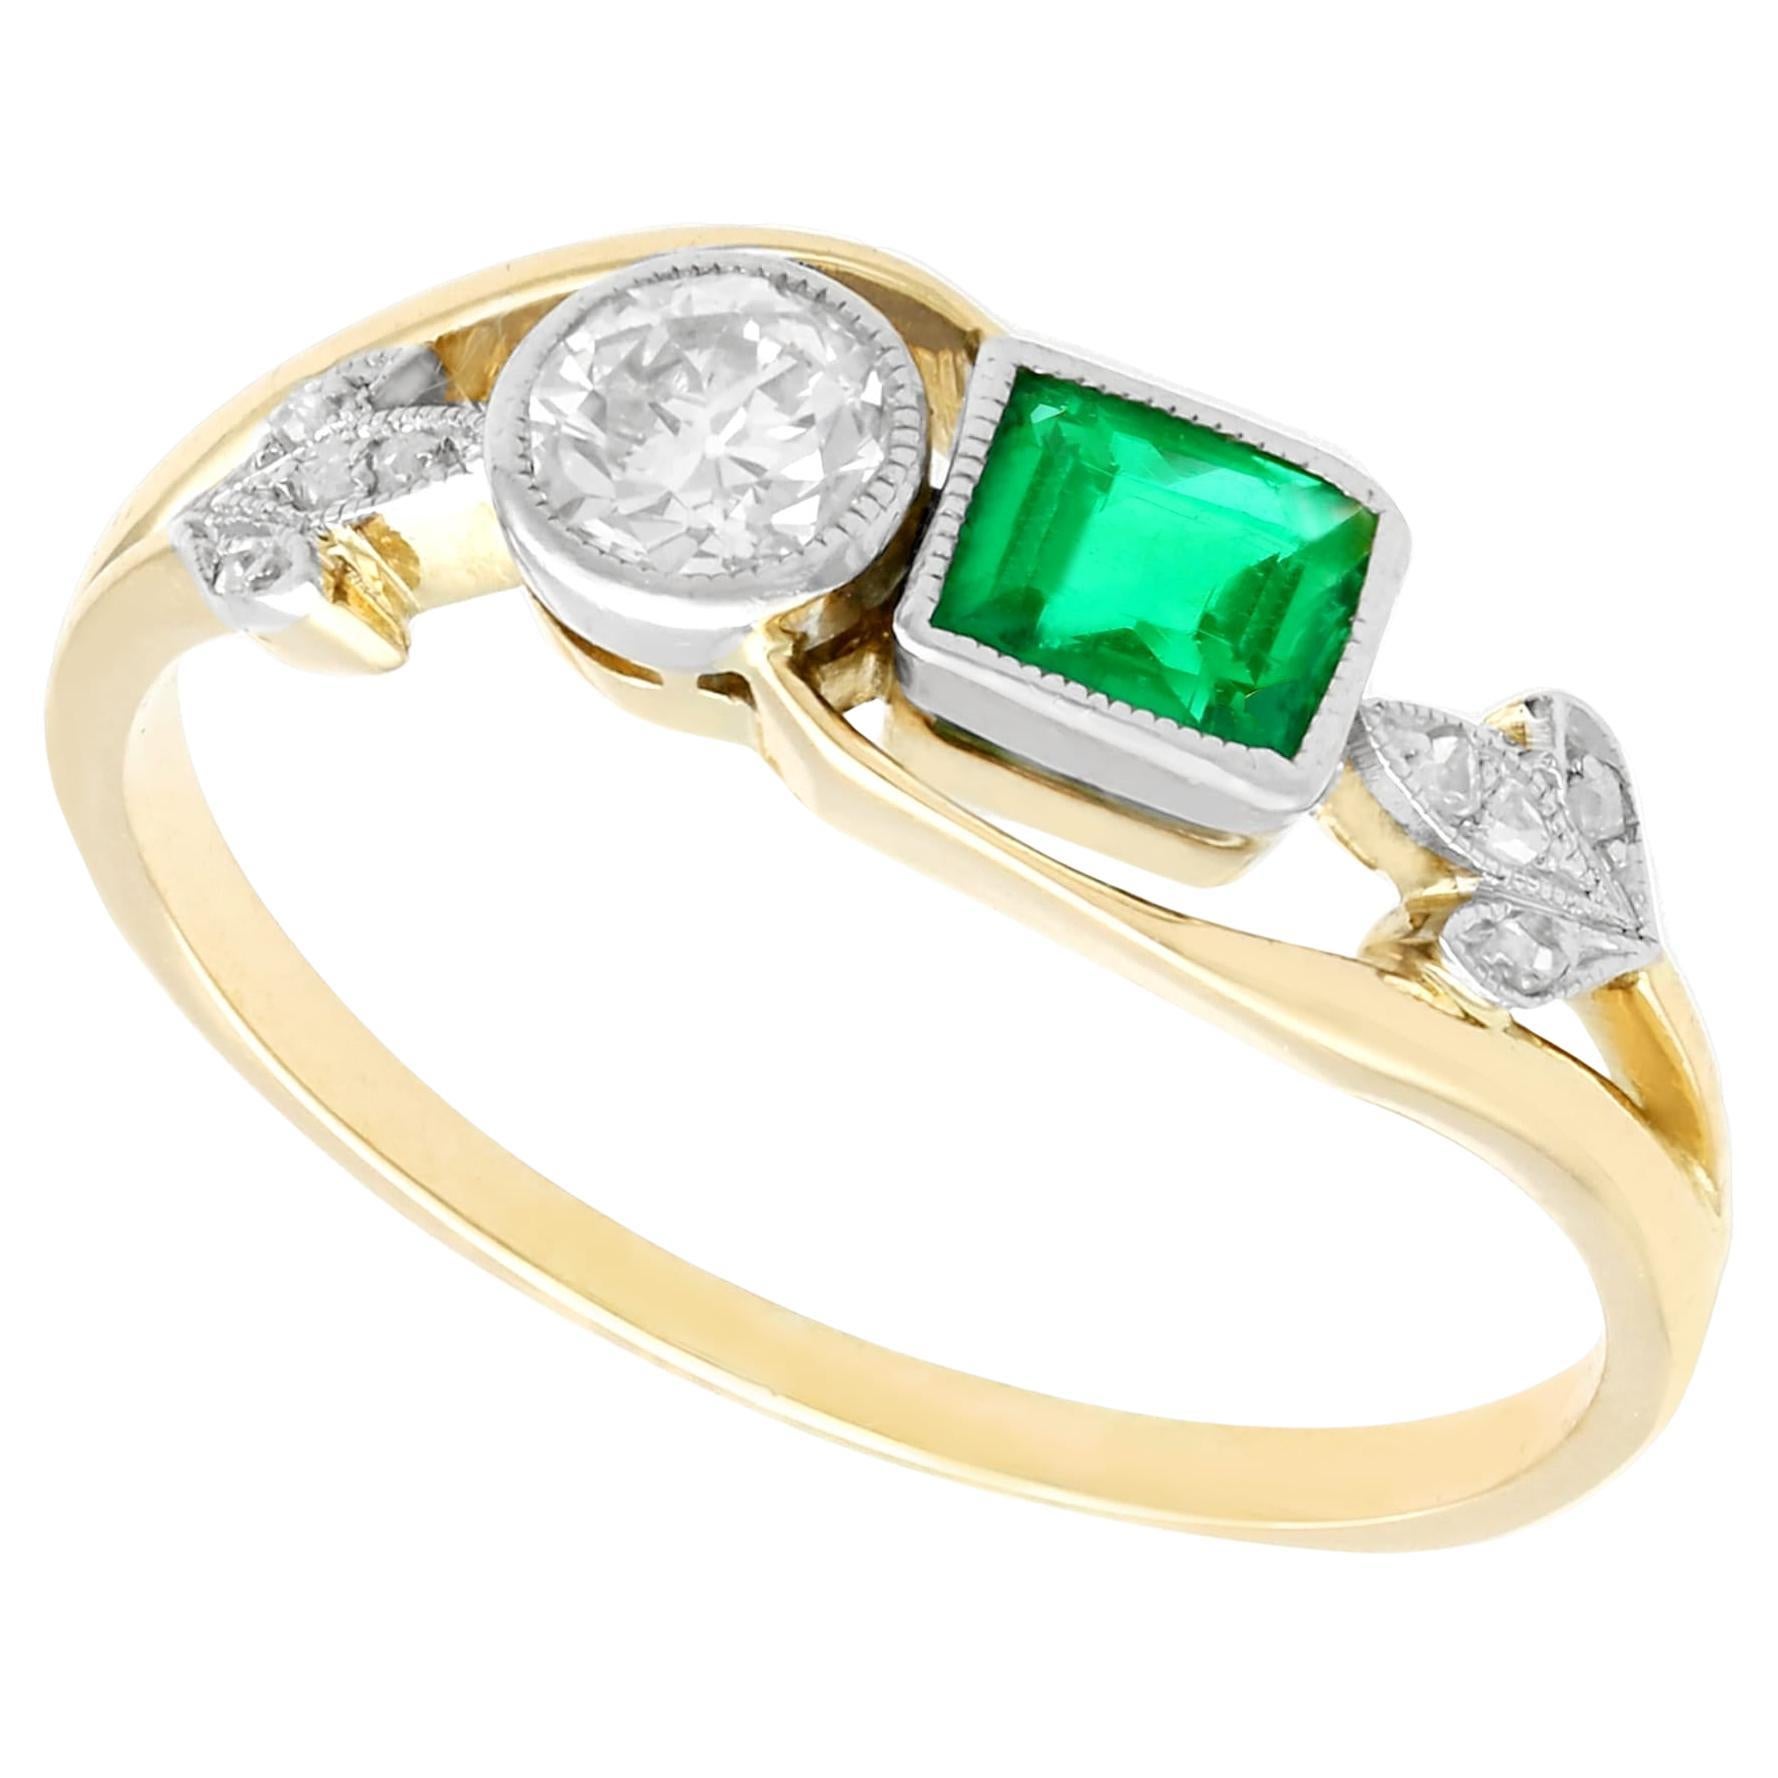 Antique Emerald and Diamond 14K Yellow Gold Twist Ring, Circa 1920 For Sale